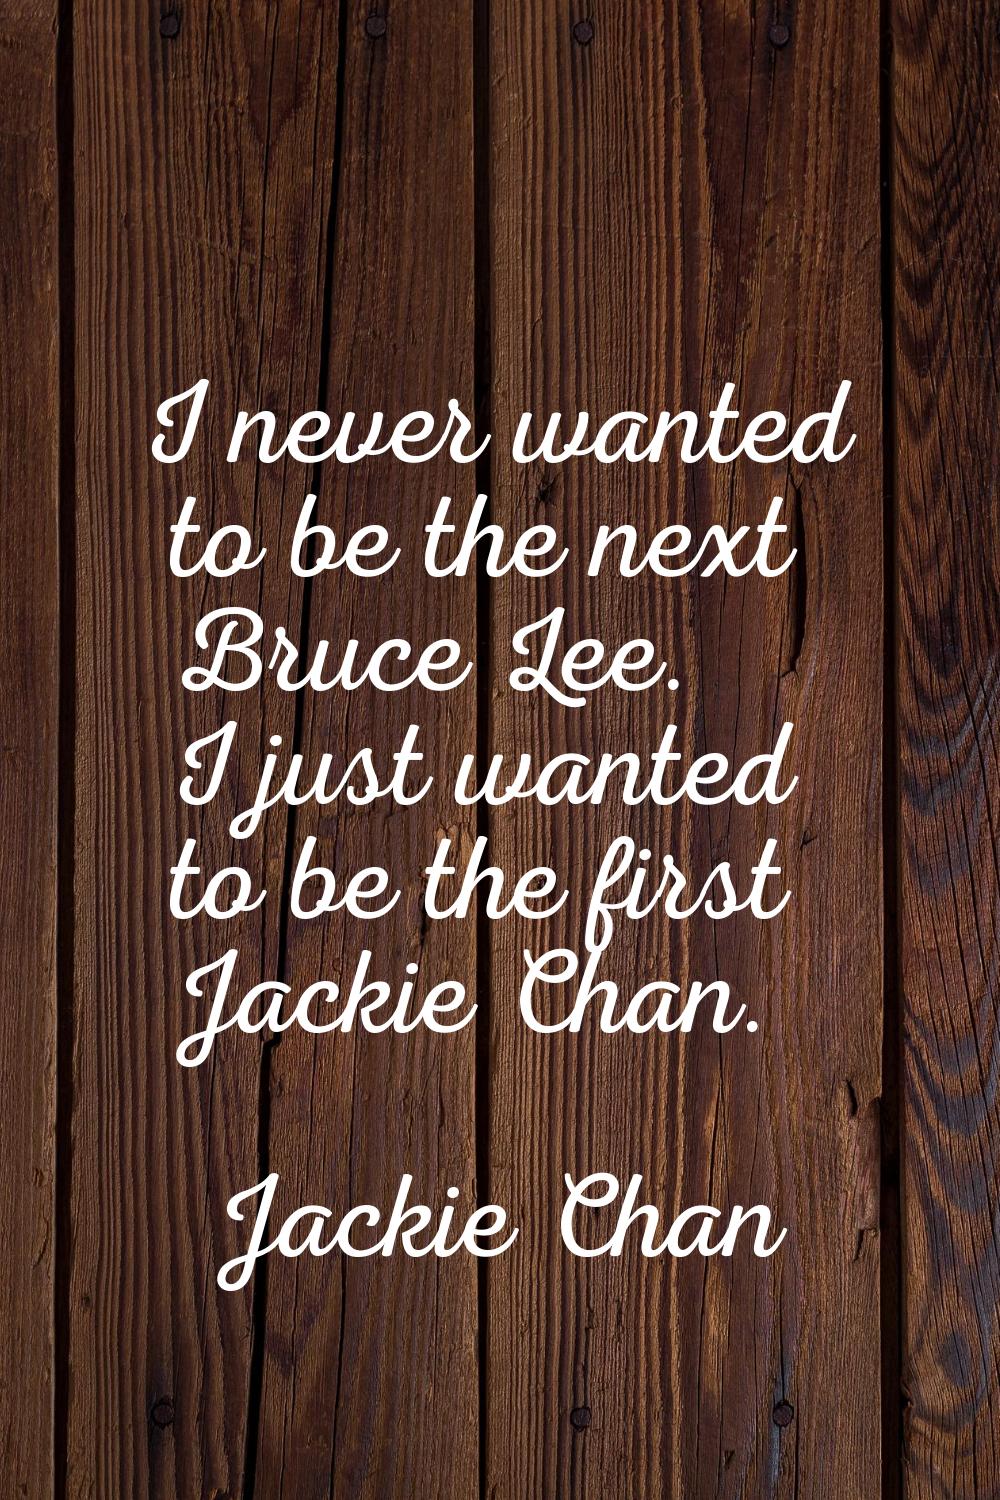 I never wanted to be the next Bruce Lee. I just wanted to be the first Jackie Chan.